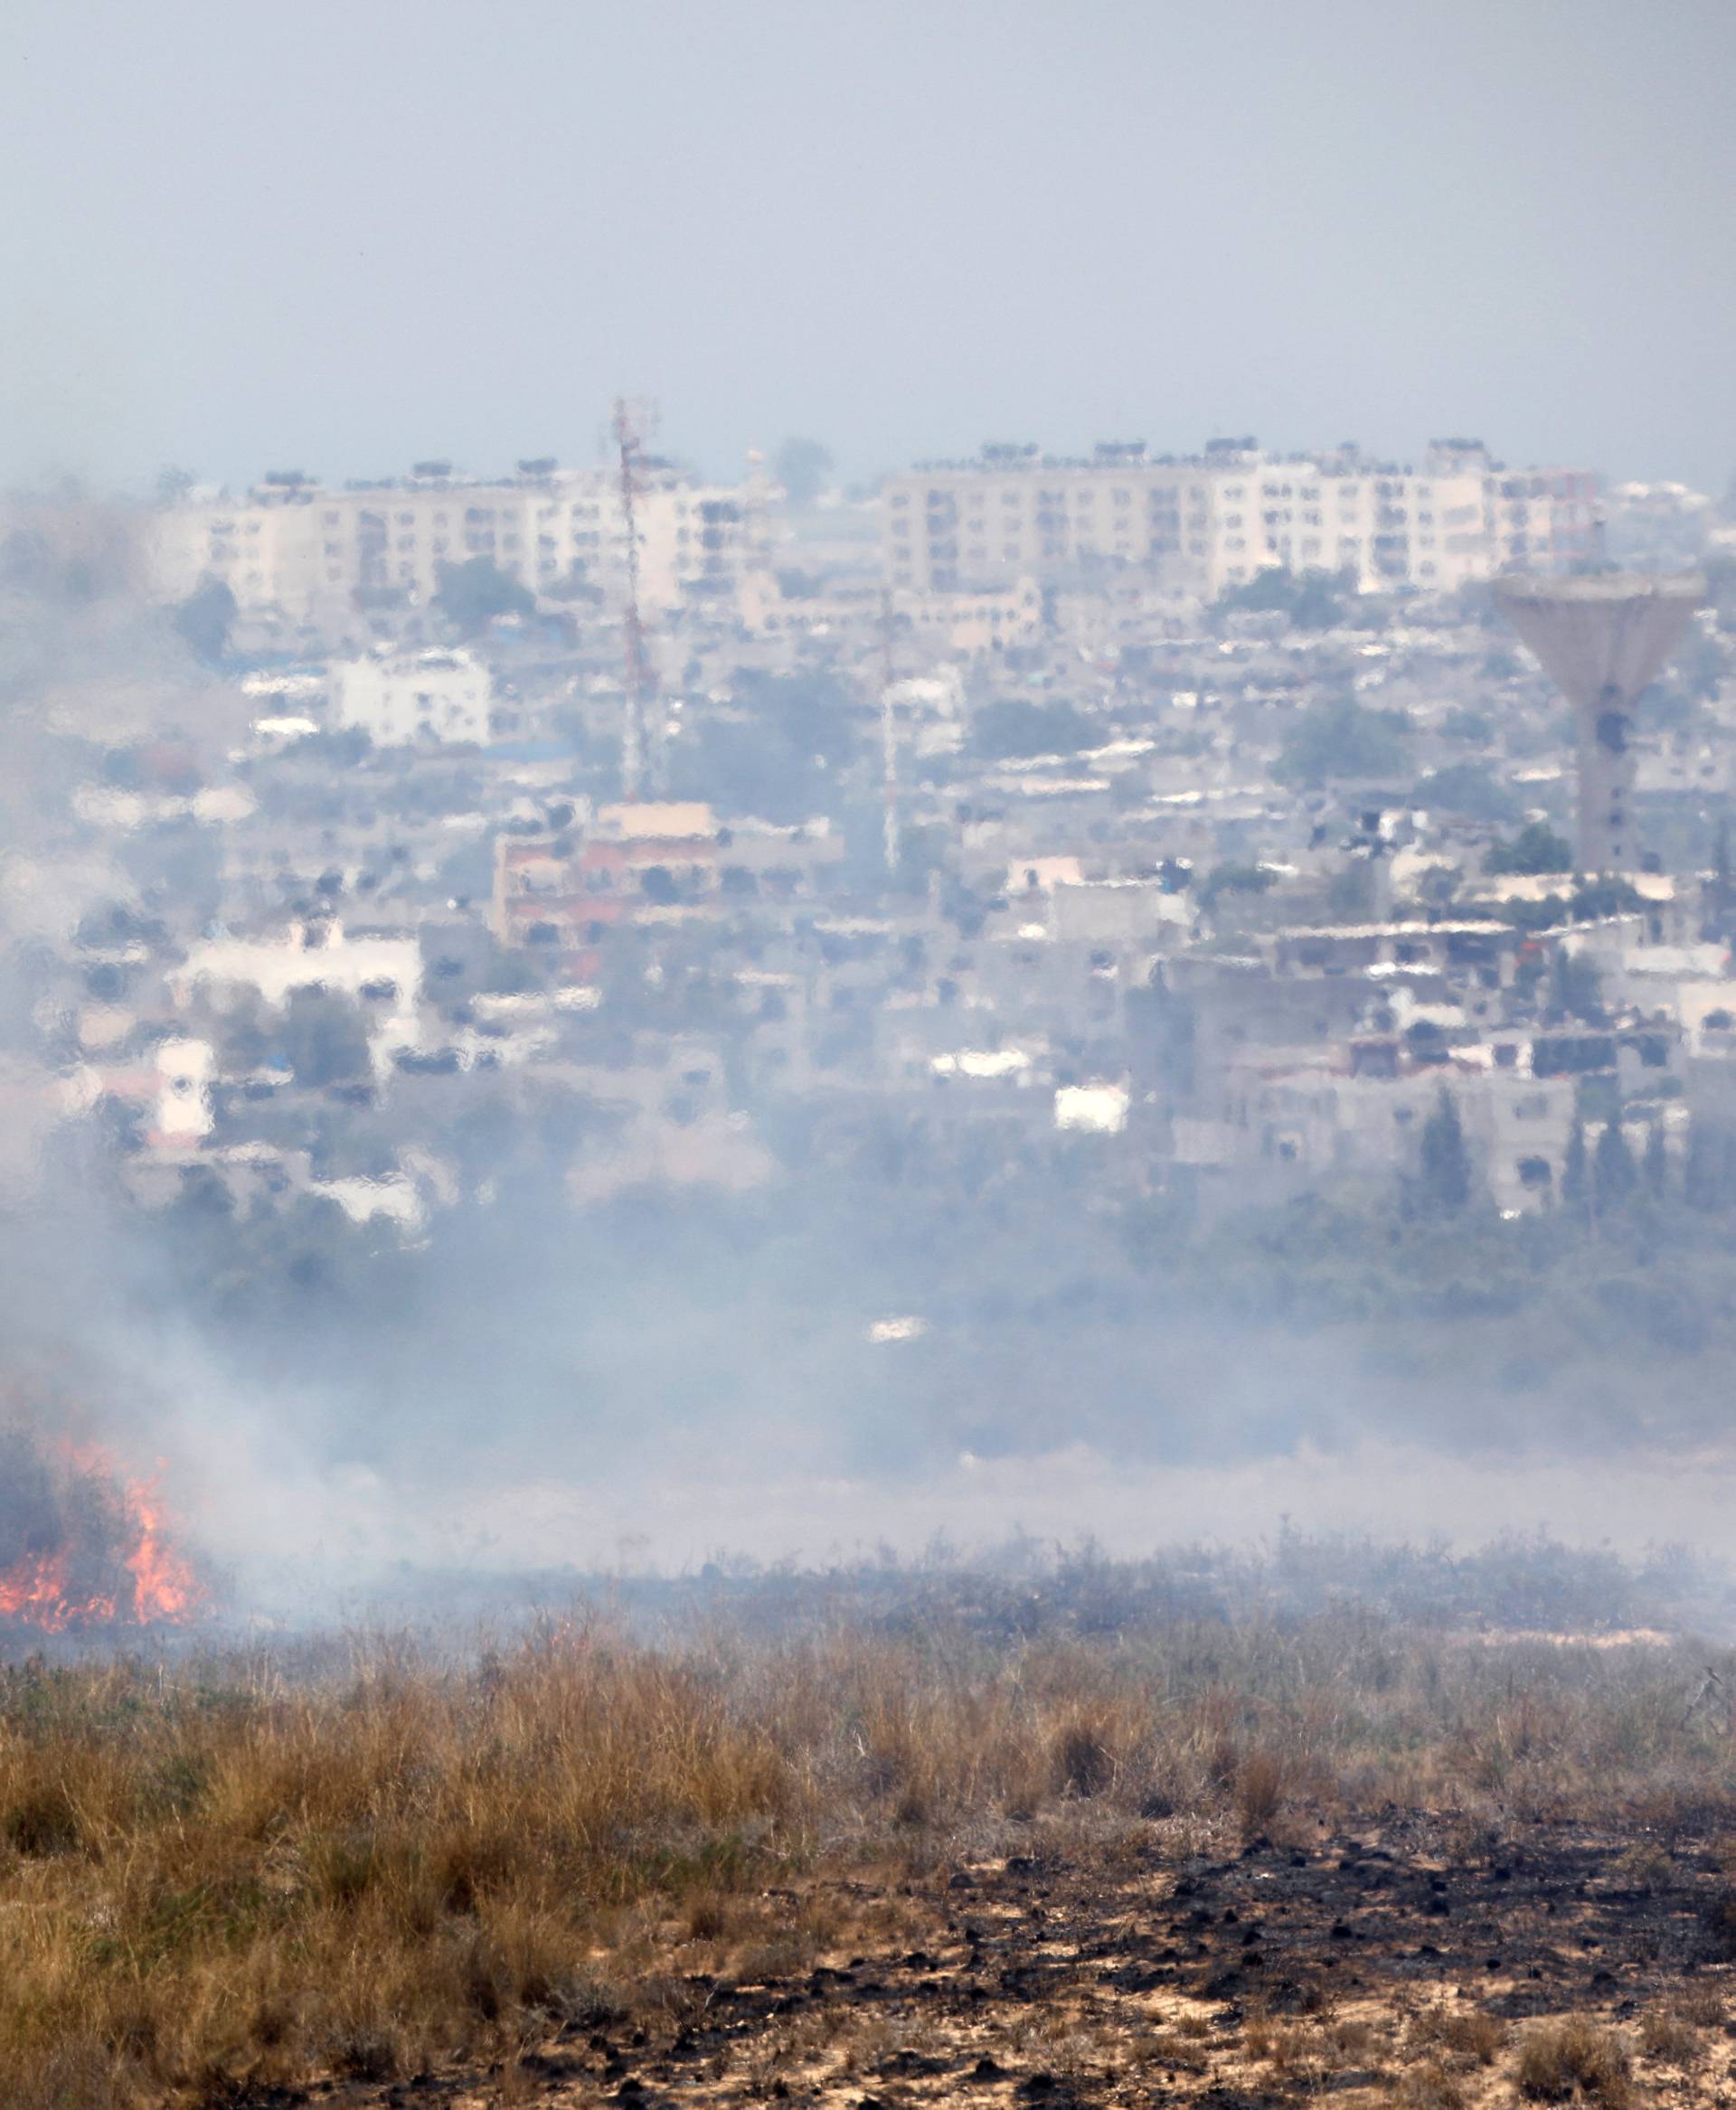 A fire burns in scrubland in Israel near the Gaza Strip, in an area where Palestinians have been causing blazes by flying kites and balloons loaded with flammable material across the border